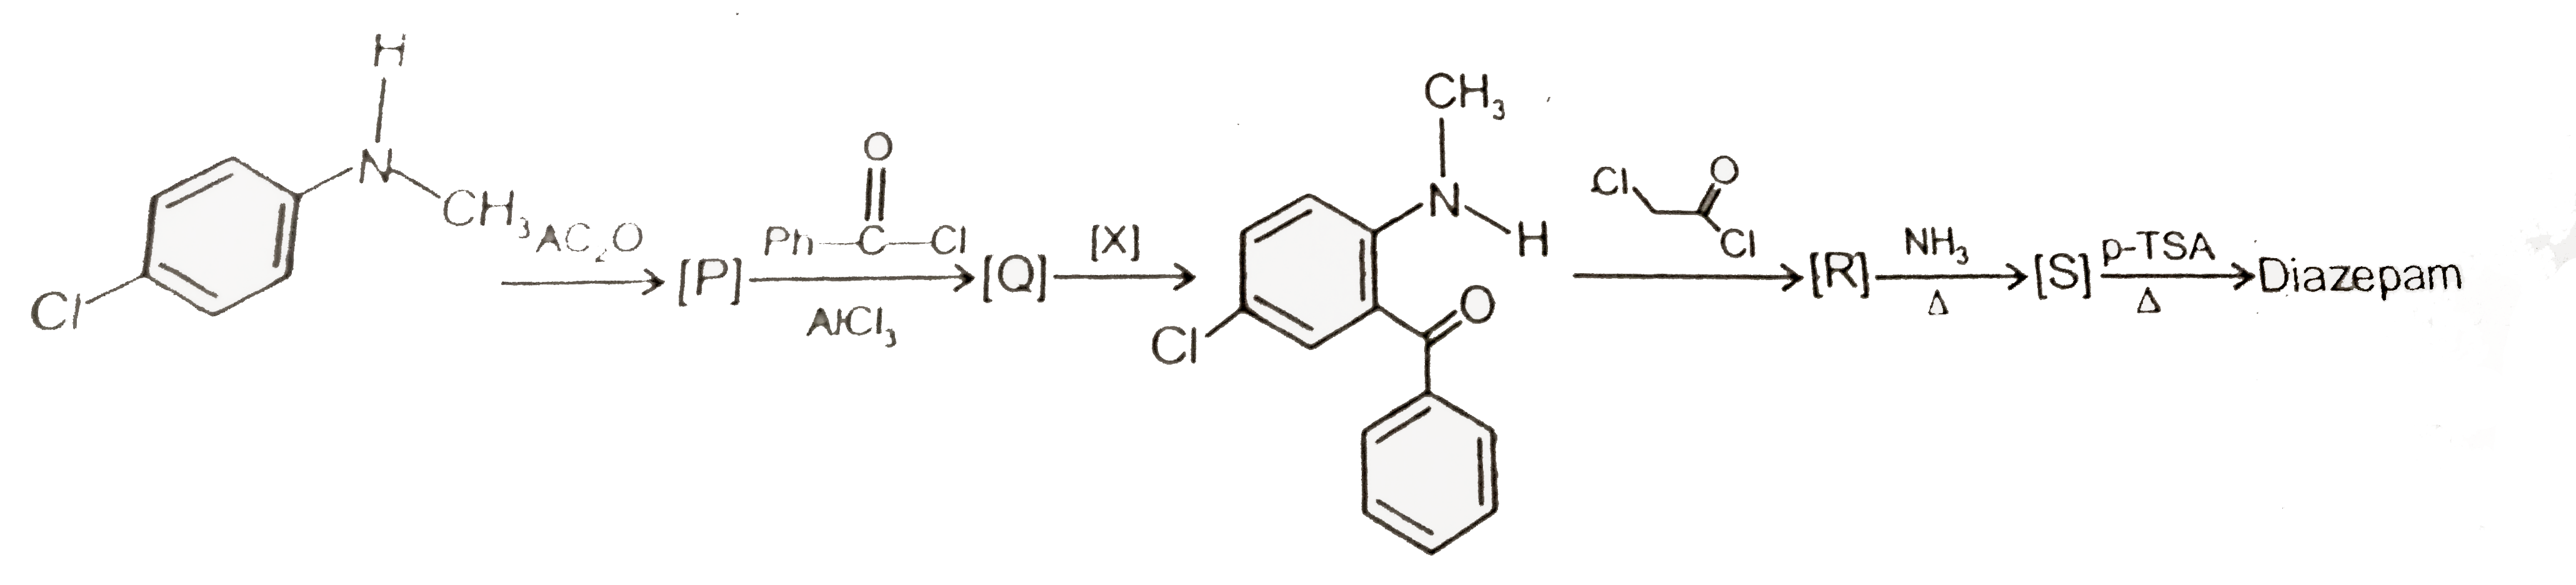 Following is an outline for the synthesis of diazepam. A commonly used tranquilizer.      The reagent [X] in the reaction could be